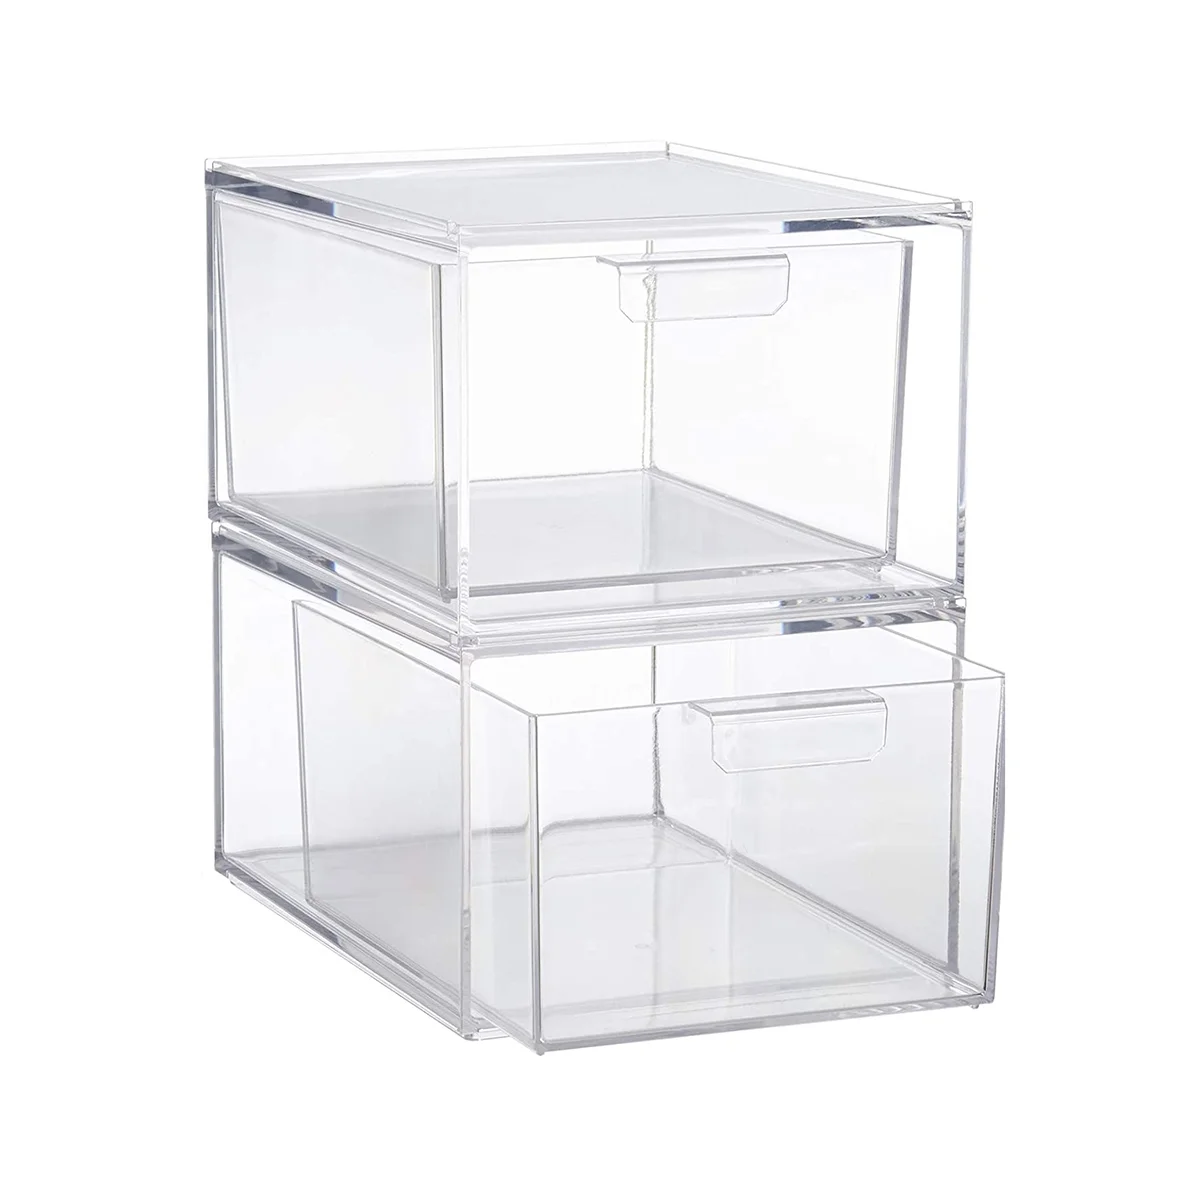 

Stackable Clear Plastic Organizer Drawers 4.5-Inches Tall Organize Cosmetics and Beauty Supplies